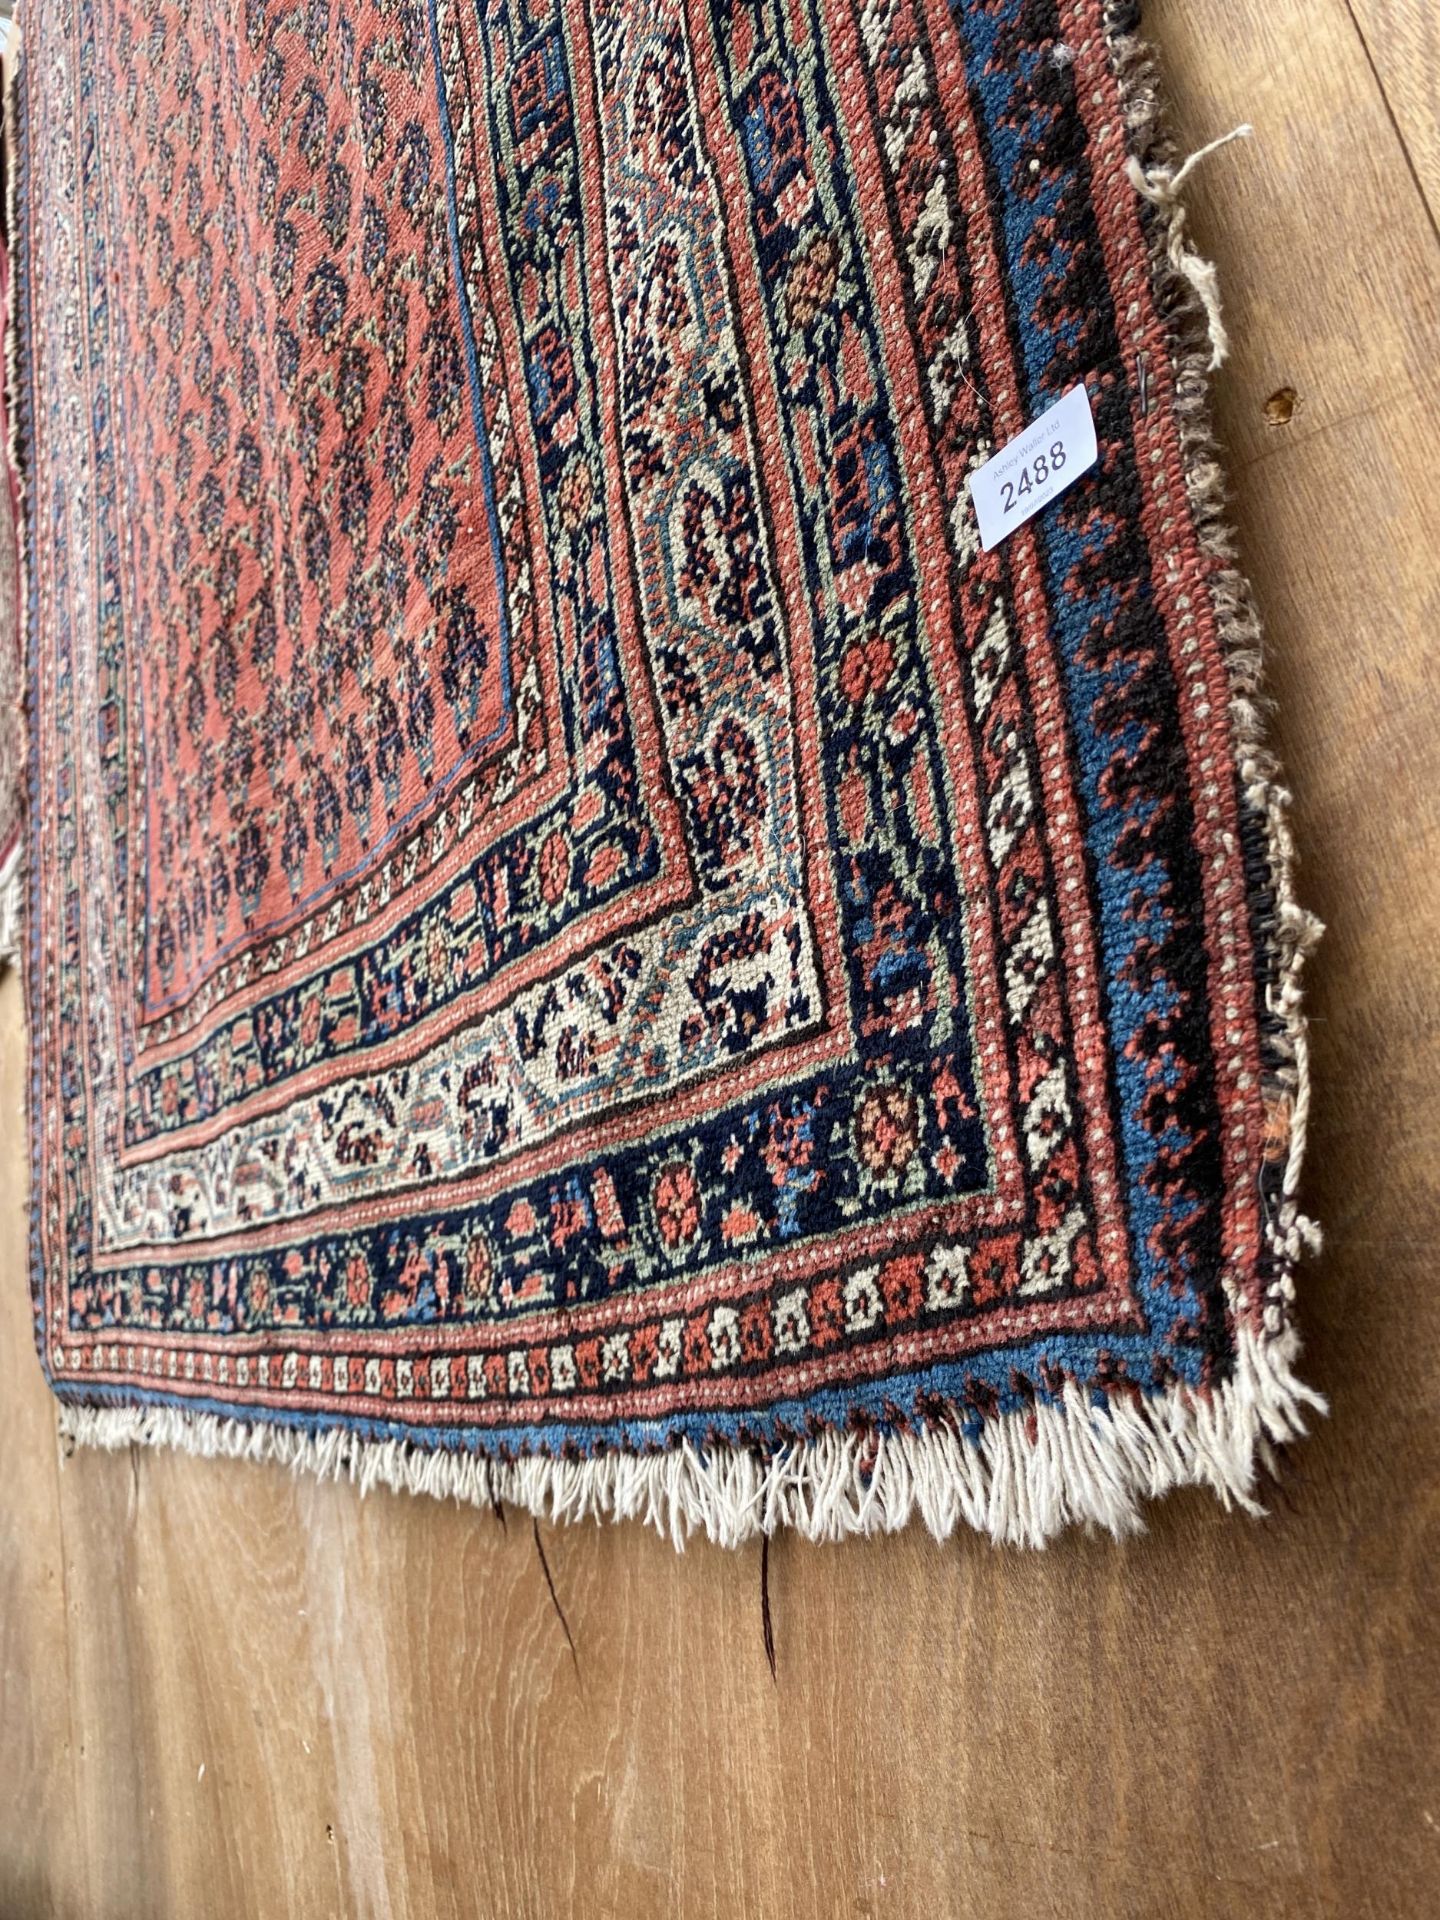 A LARGE RED AND BLUE PATTERNED RUG - Image 2 of 2